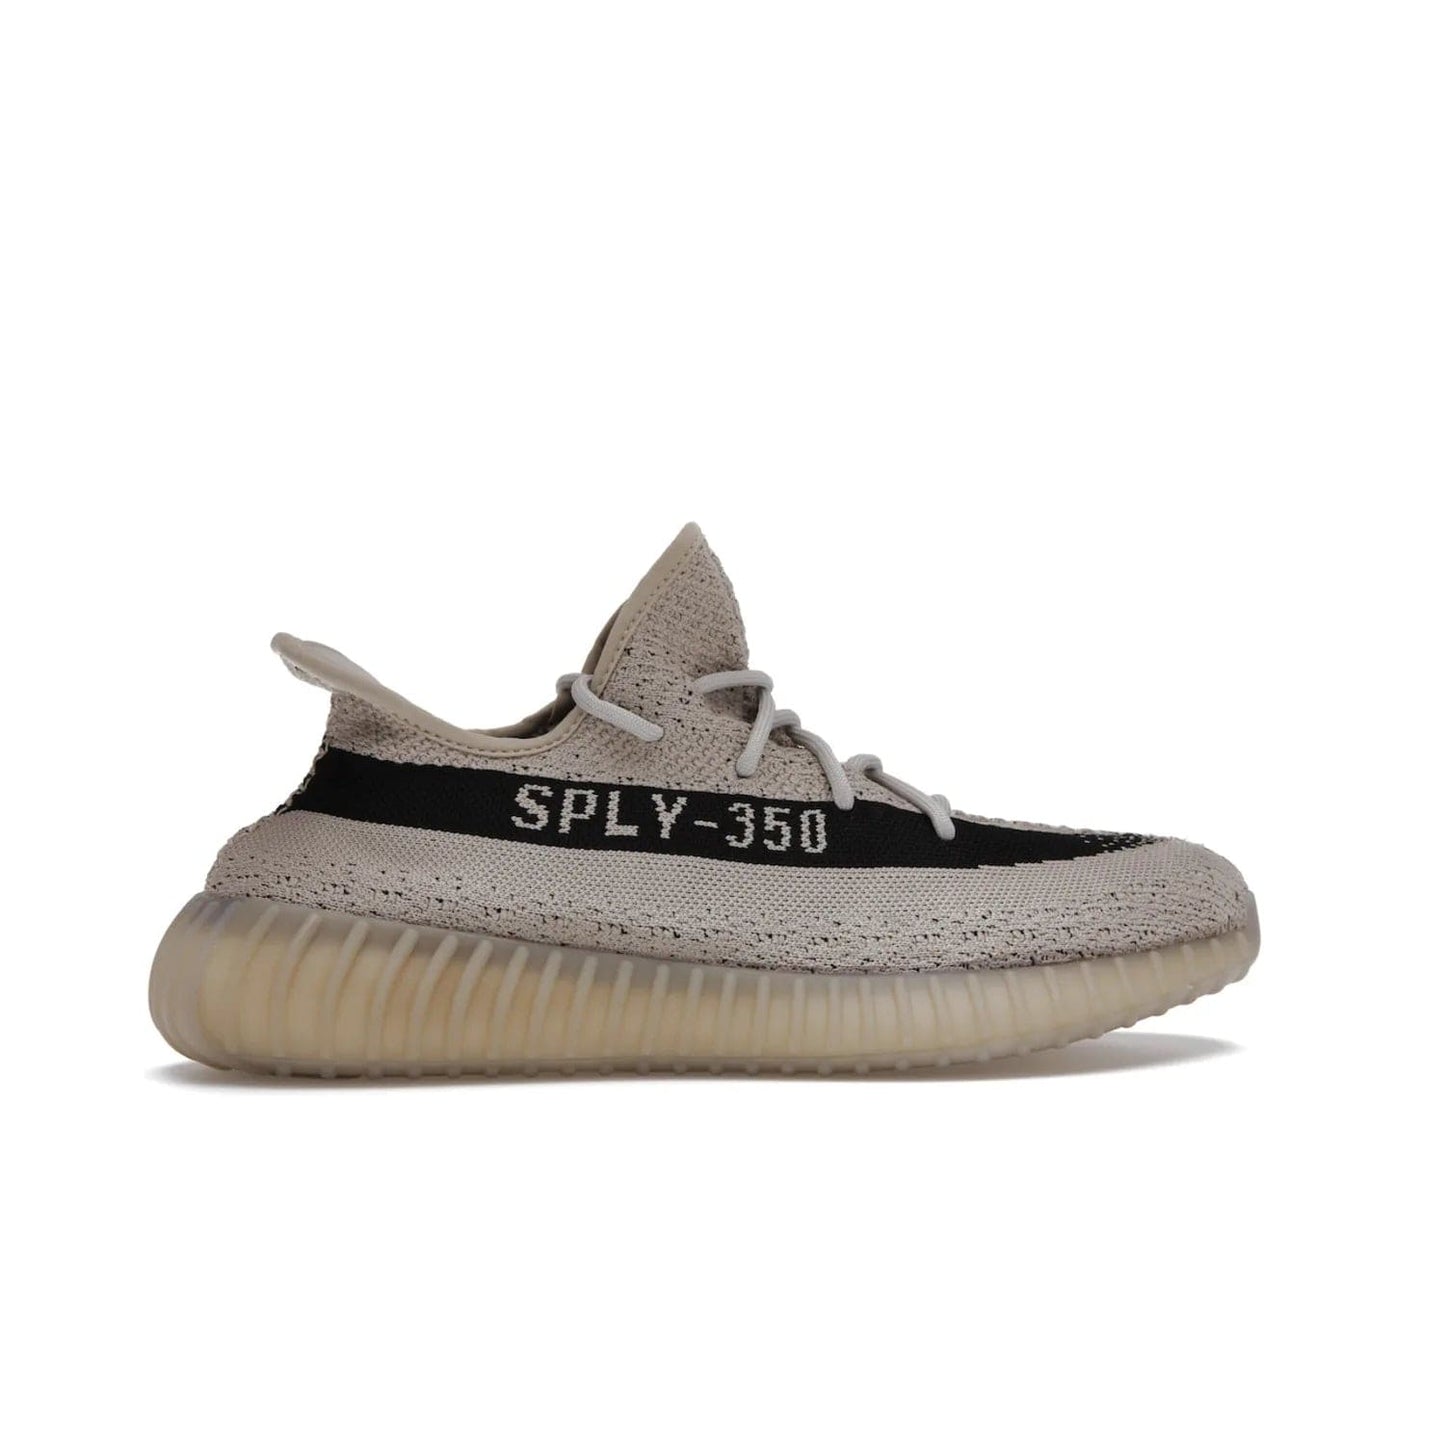 adidas Yeezy Boost 350 V2 Slate - Image 36 - Only at www.BallersClubKickz.com - Adidas Yeezy Boost 350 V2 Slate Core Black Slate featuring Primeknit upper, Boost midsole and semi-translucent TPU cage. Launched on 3/9/2022, retailed at $230.